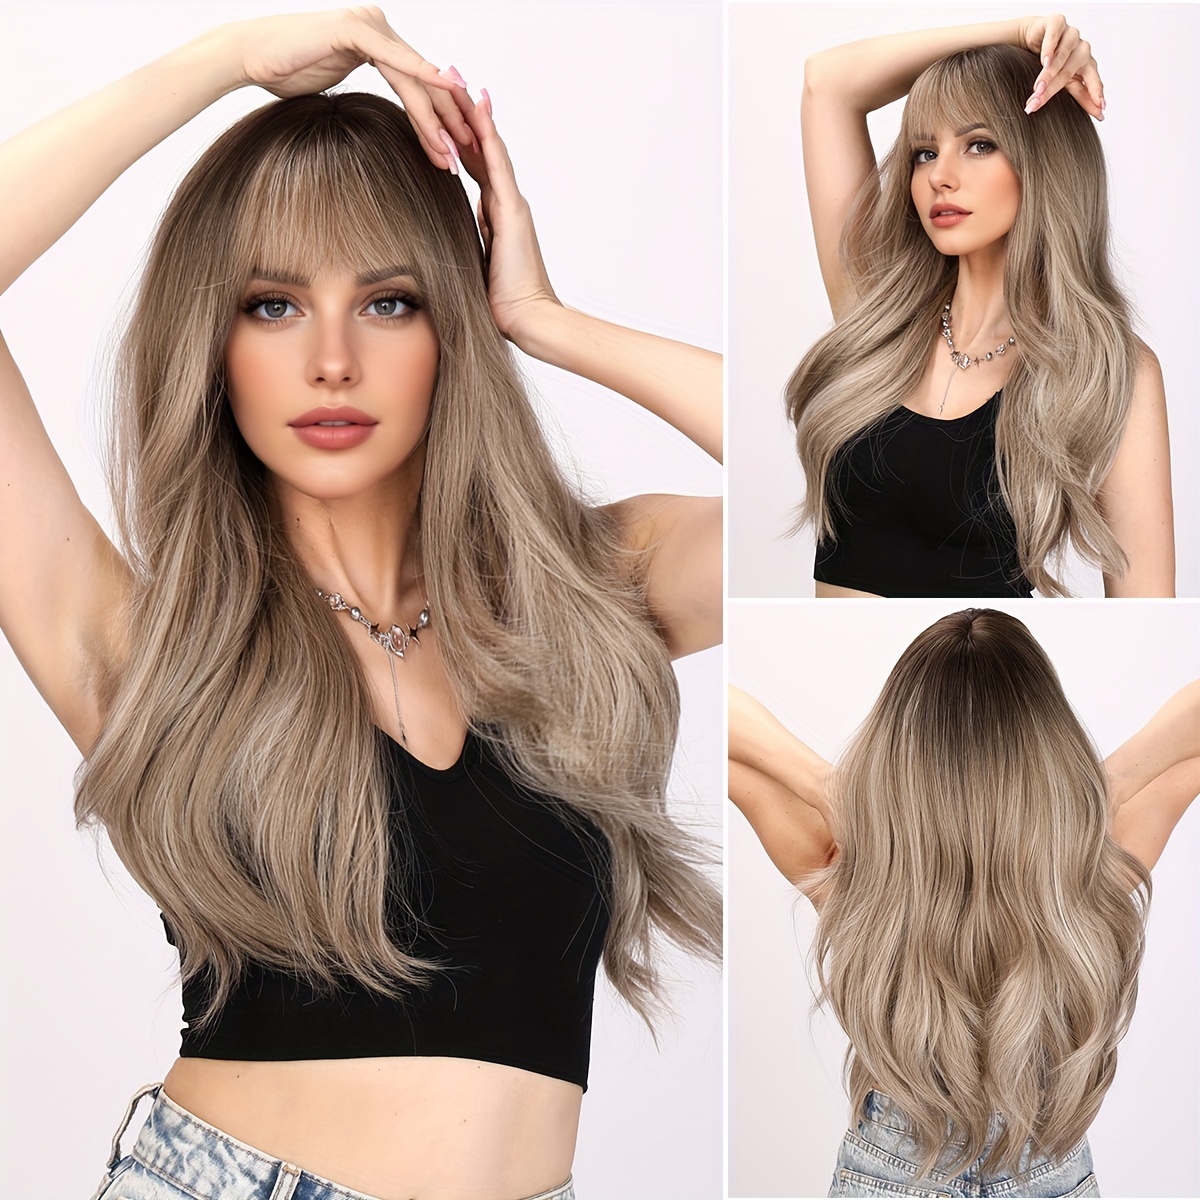 

New Stylish And Elegant Brown Wig - Women's Synthetic Wig -26 Inch Fashionable Ideal Choice For Women, Heat-resistant, Suitable For Daily Wear And Parties